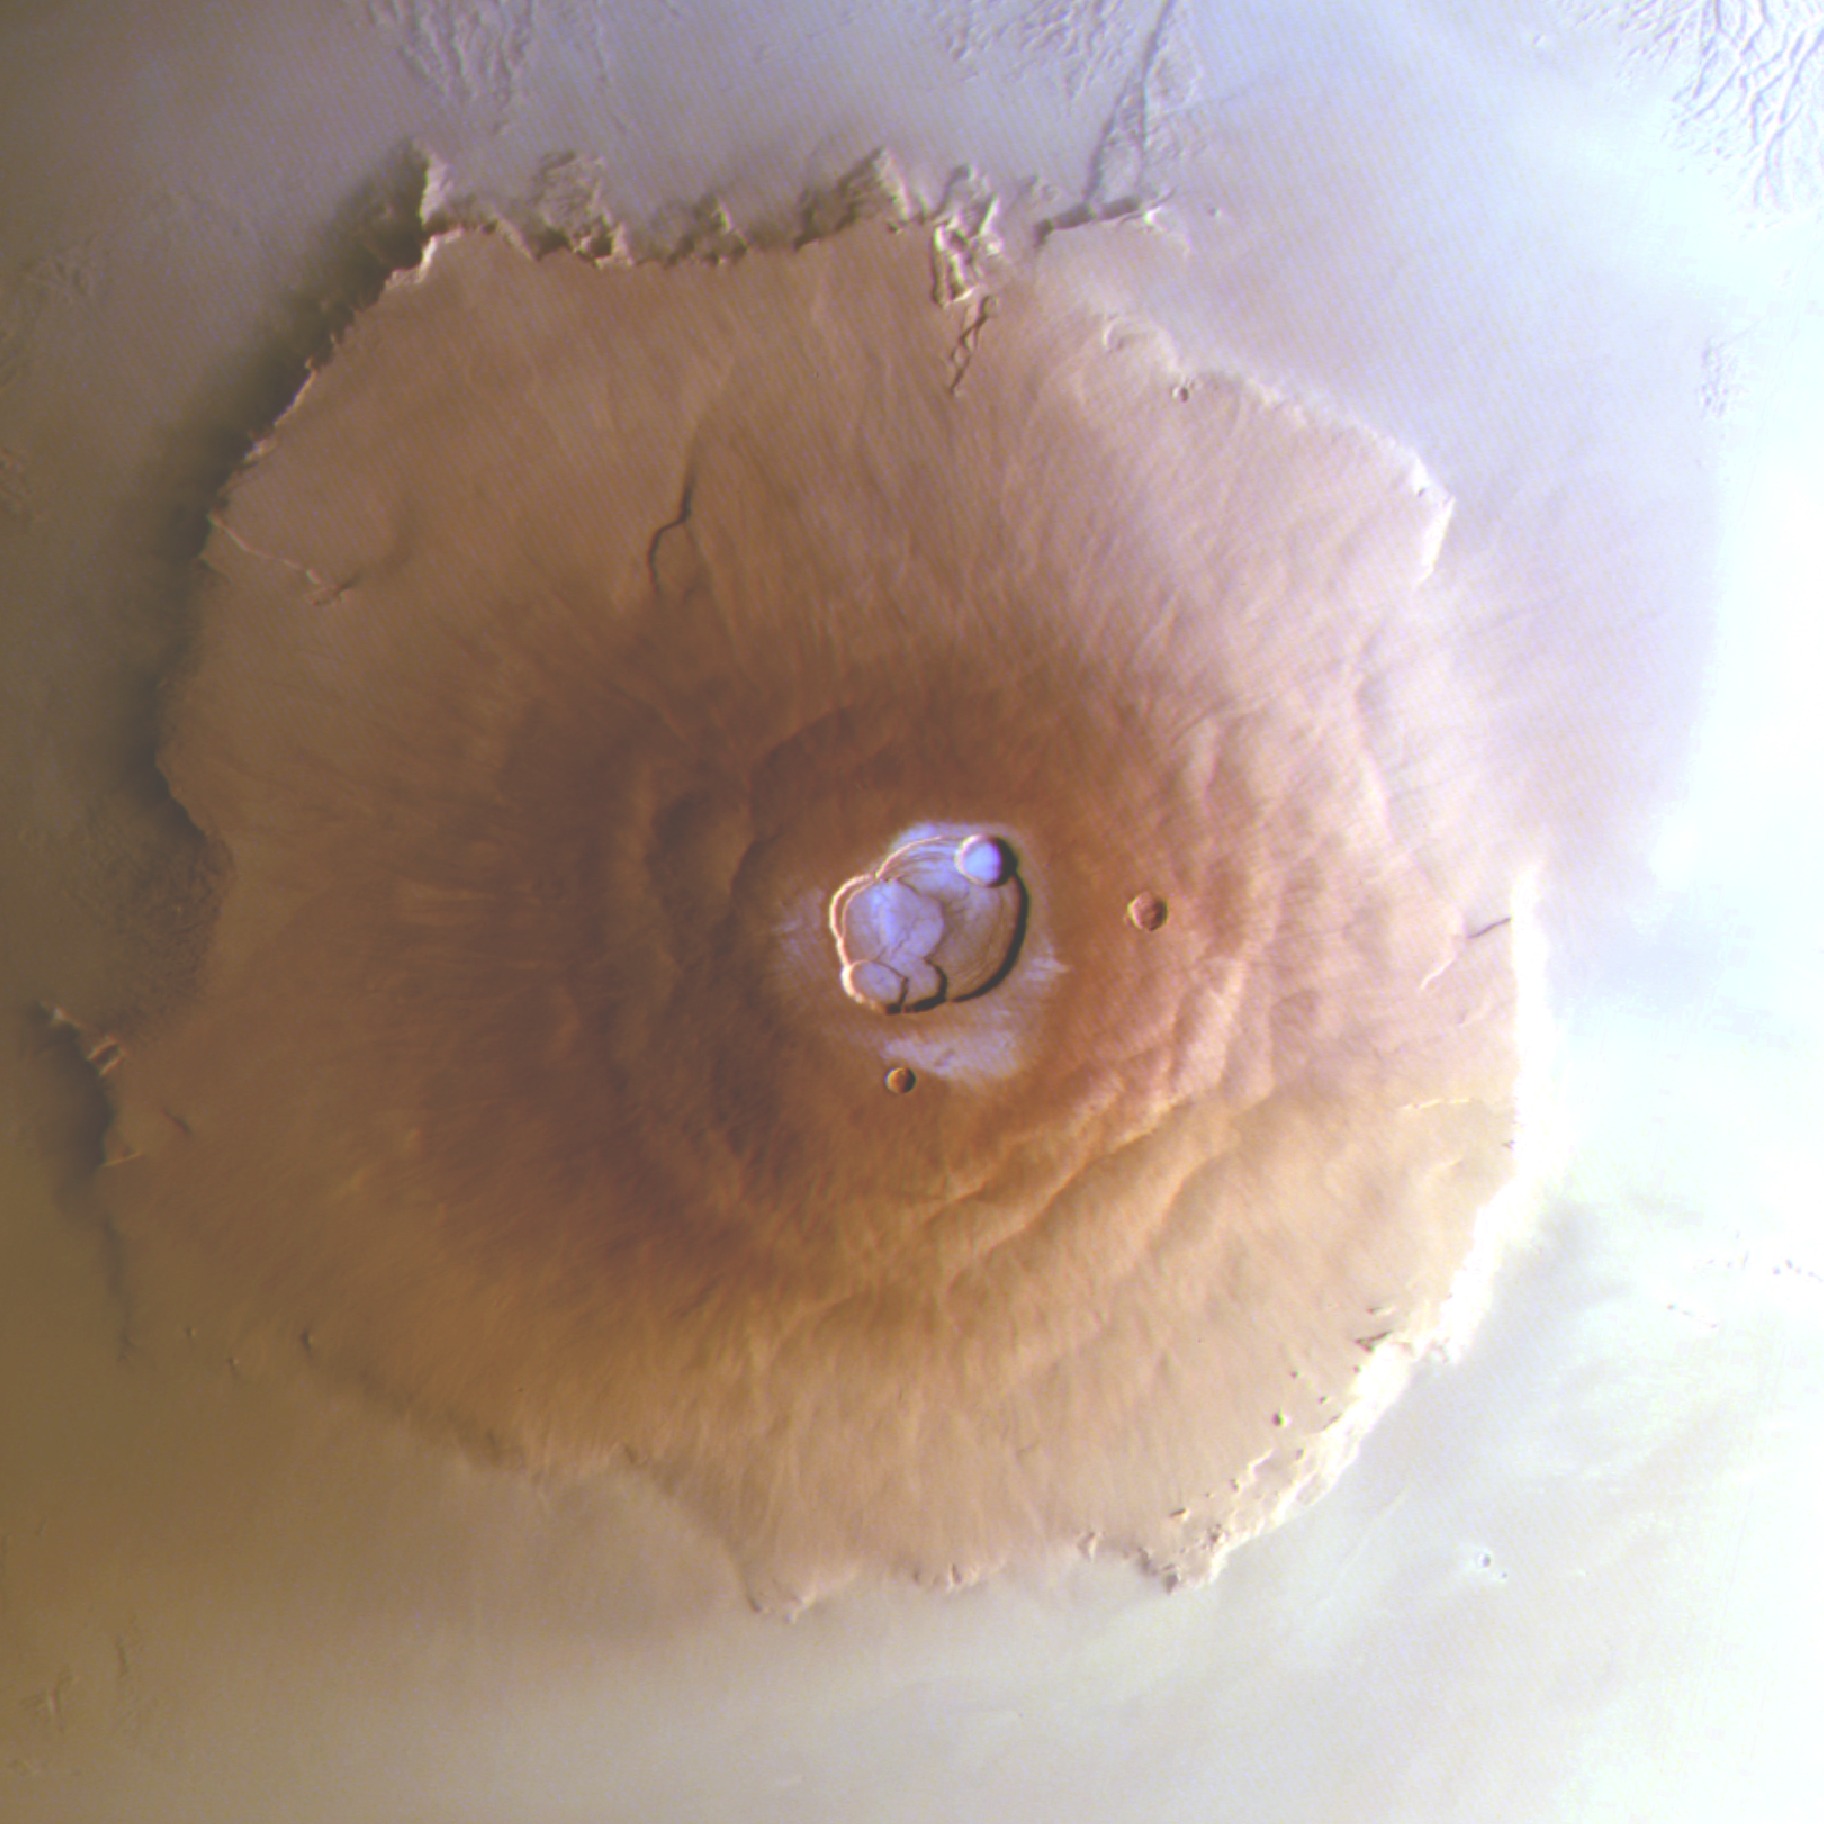 Frost (colored blue) coats the top of Olympus Mons, the tallest volcano in our solar system. This image was shot by ESA’s Mars Express orbiter at 7:20 A.M. local martian time. The mountain’s right side is illuminated by the rising Sun in the east. Credit: ESA/DLR/FU Berlin.